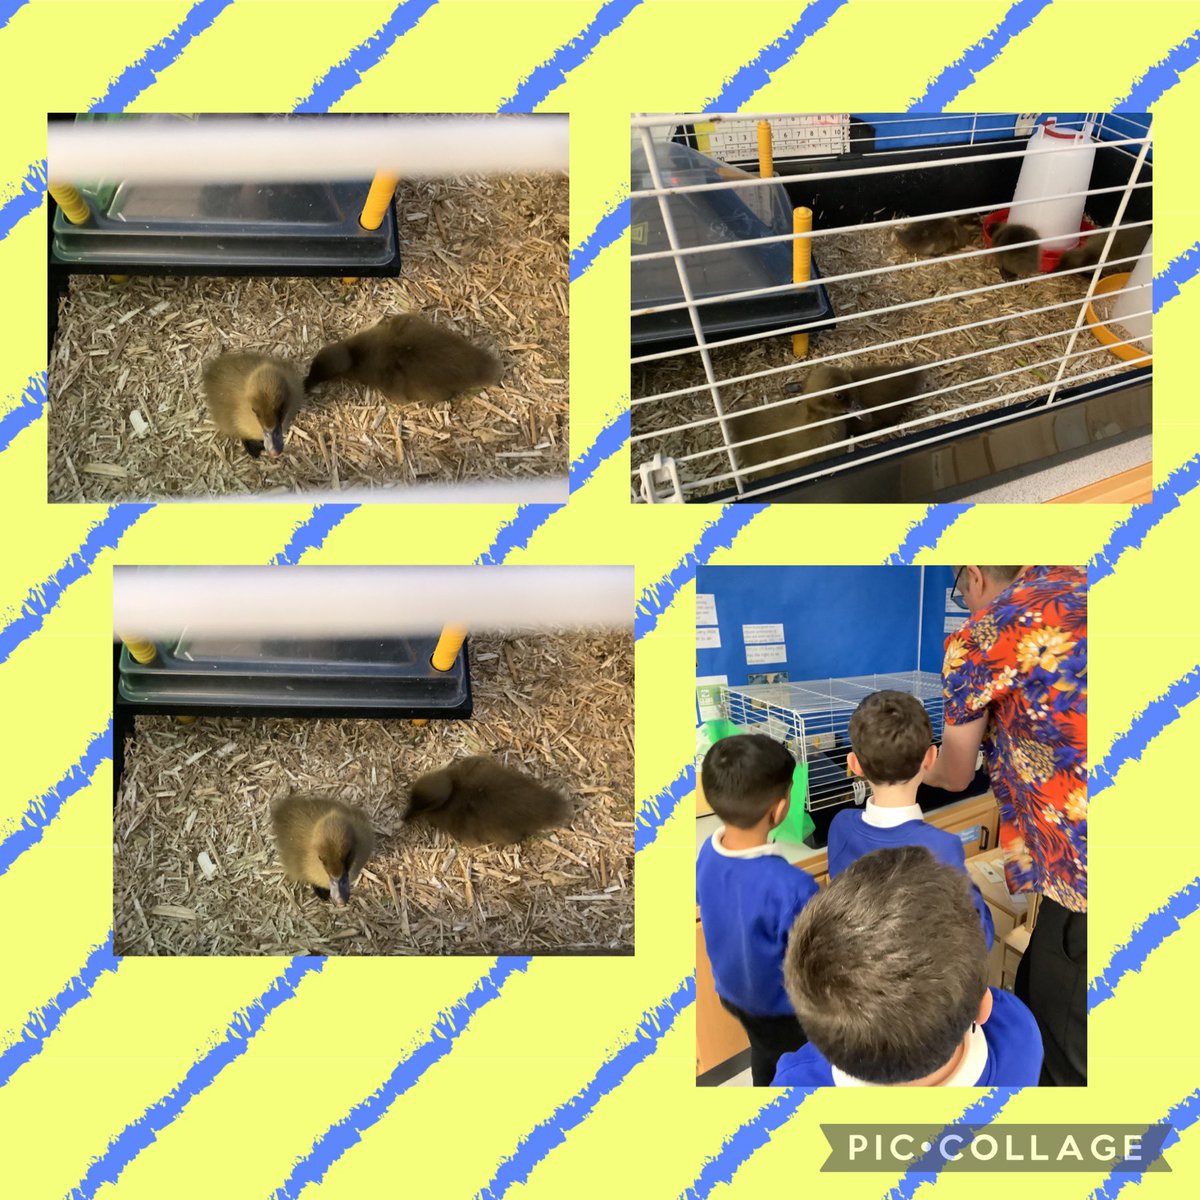 Thank you @WindsorParkFalk for inviting us over to see your ducklings #bantnurture